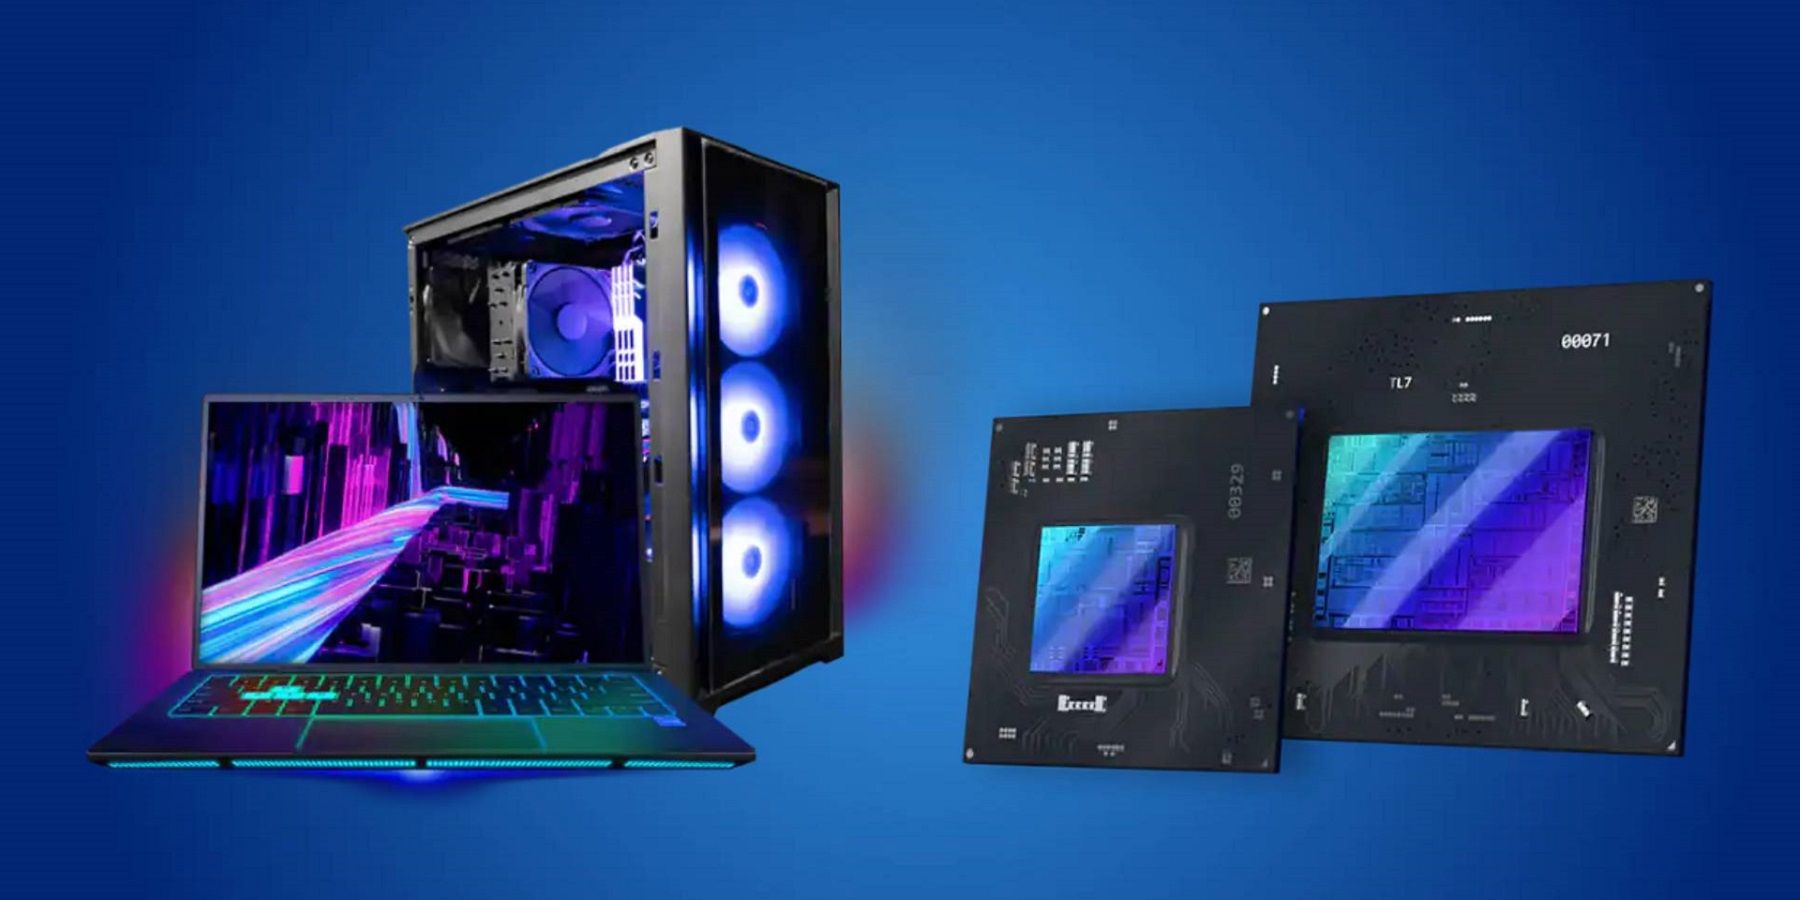 Image showing a couple of Intel Arc GPU chips next to a Desktop PC and laptop, all on a blue background.